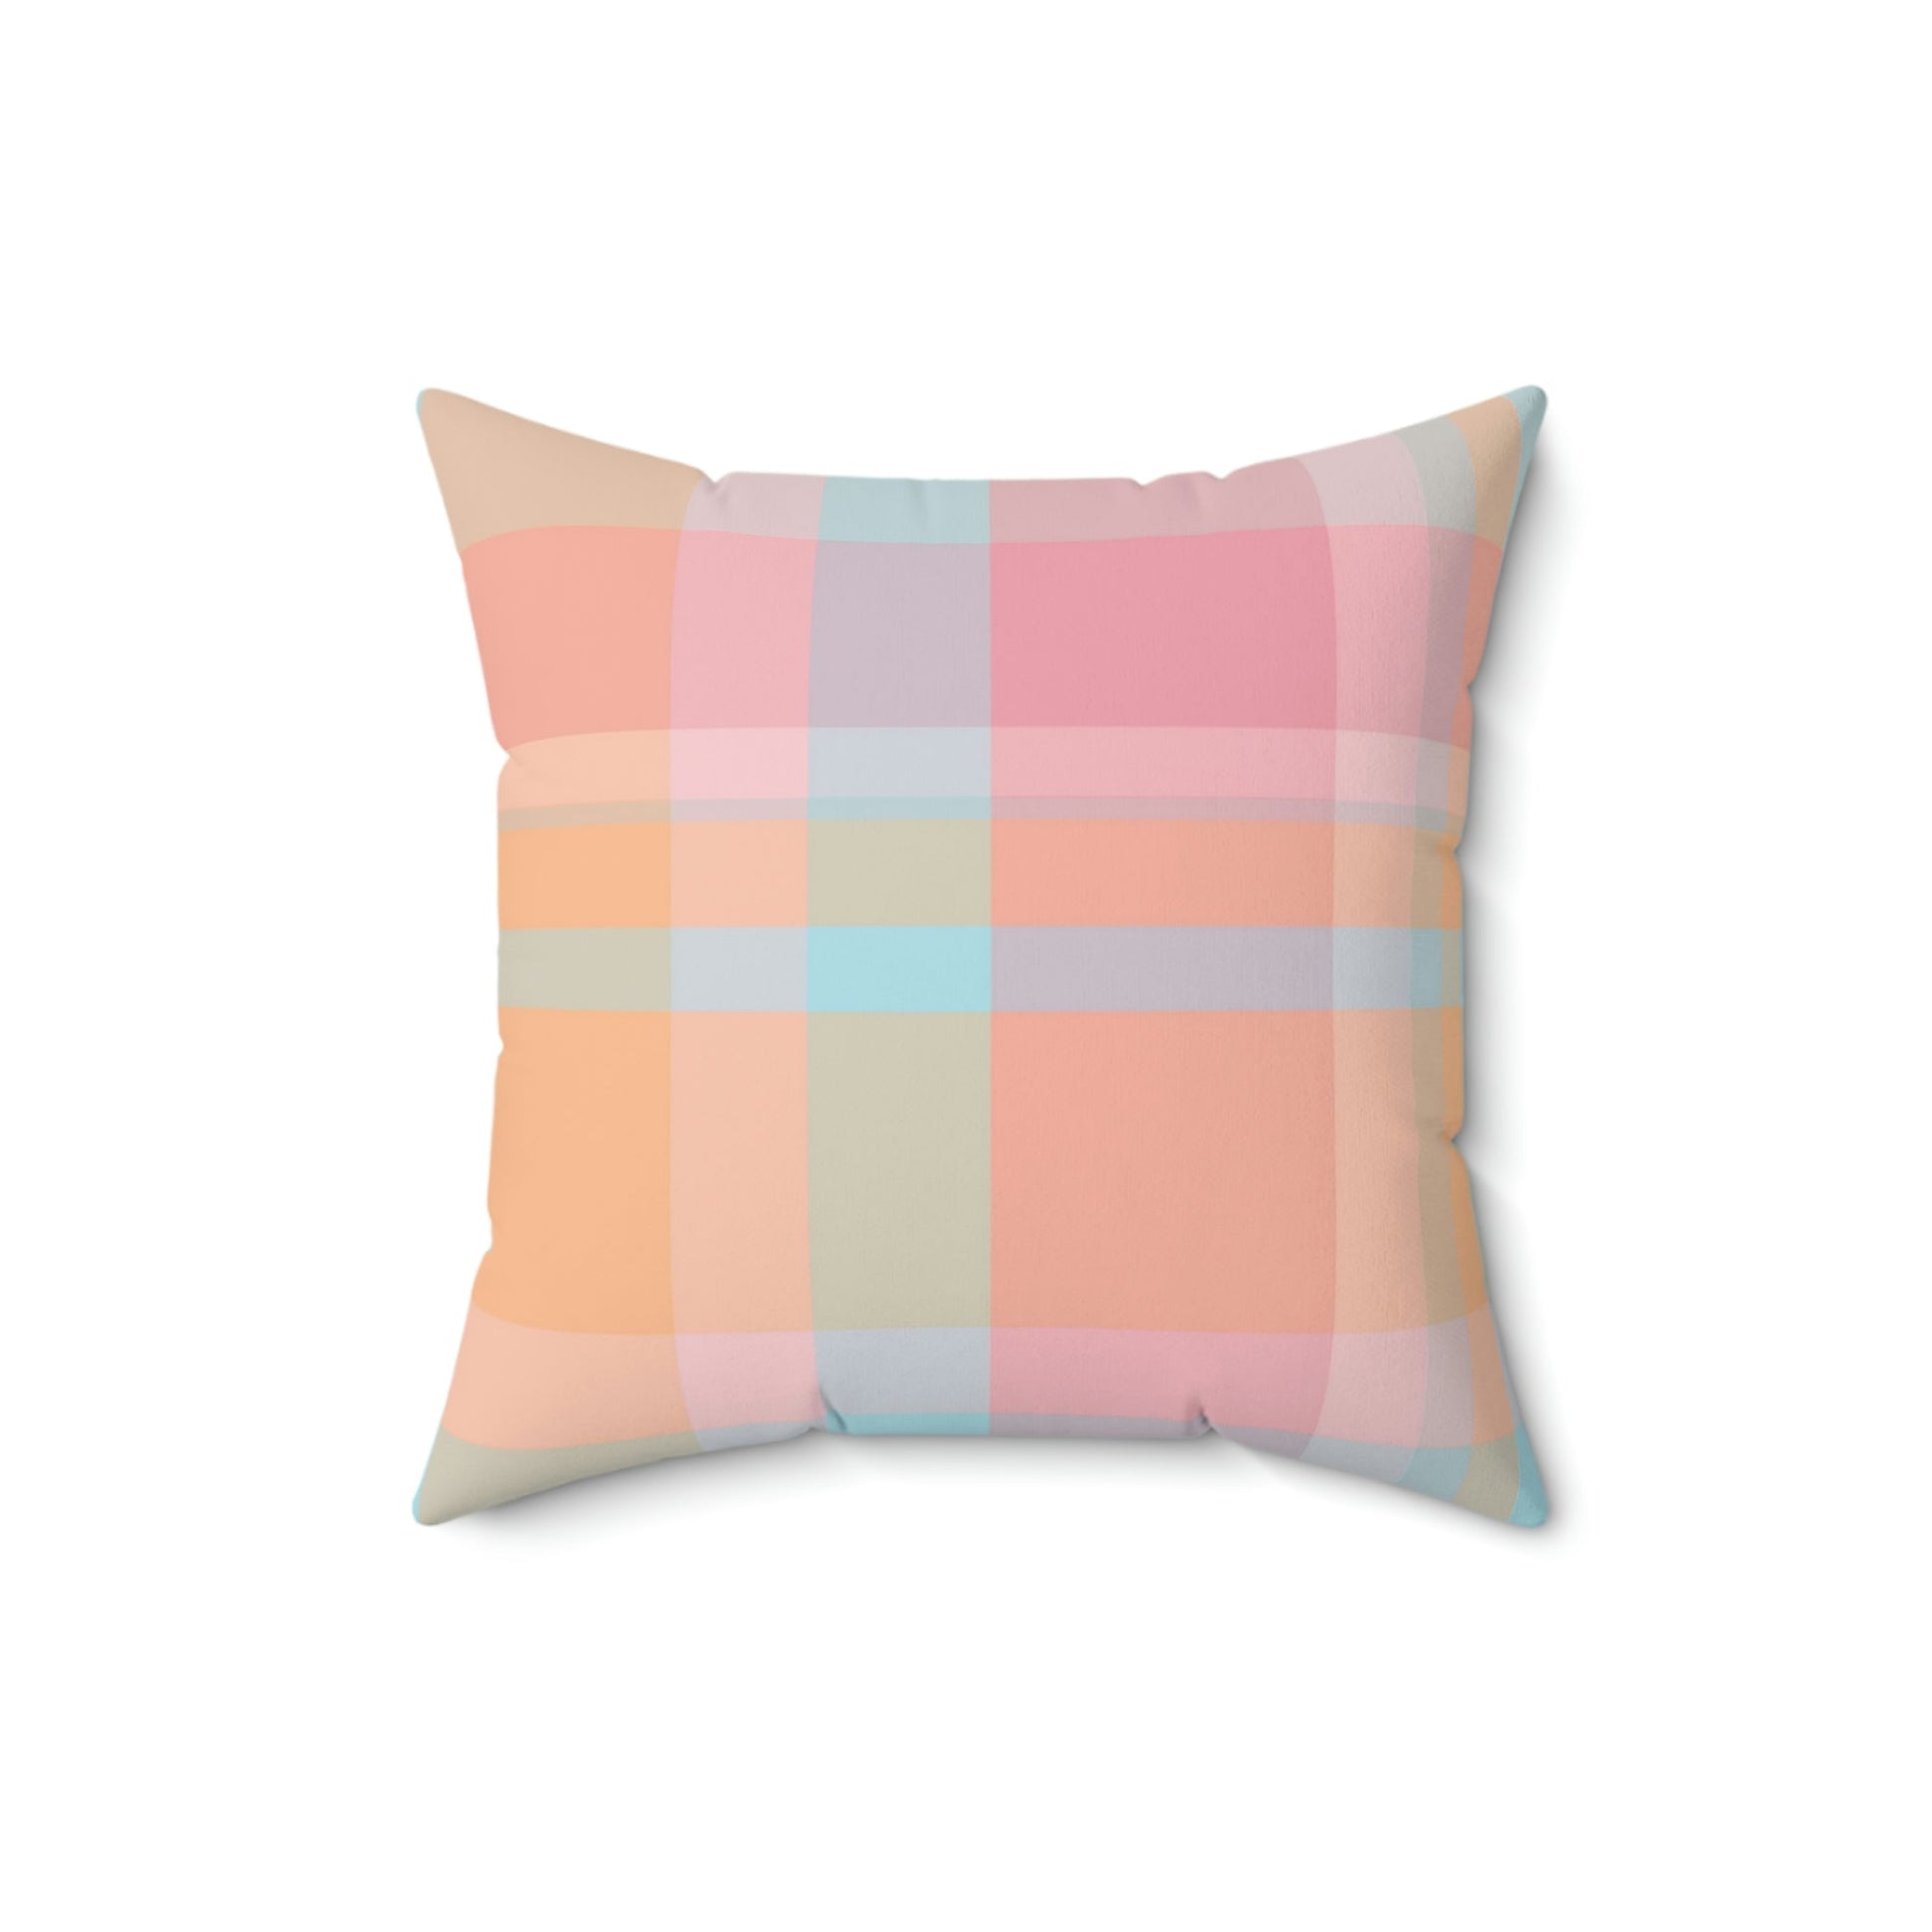 Spring Pastel Plaid Square Pillow Home Decor Pink Sweetheart